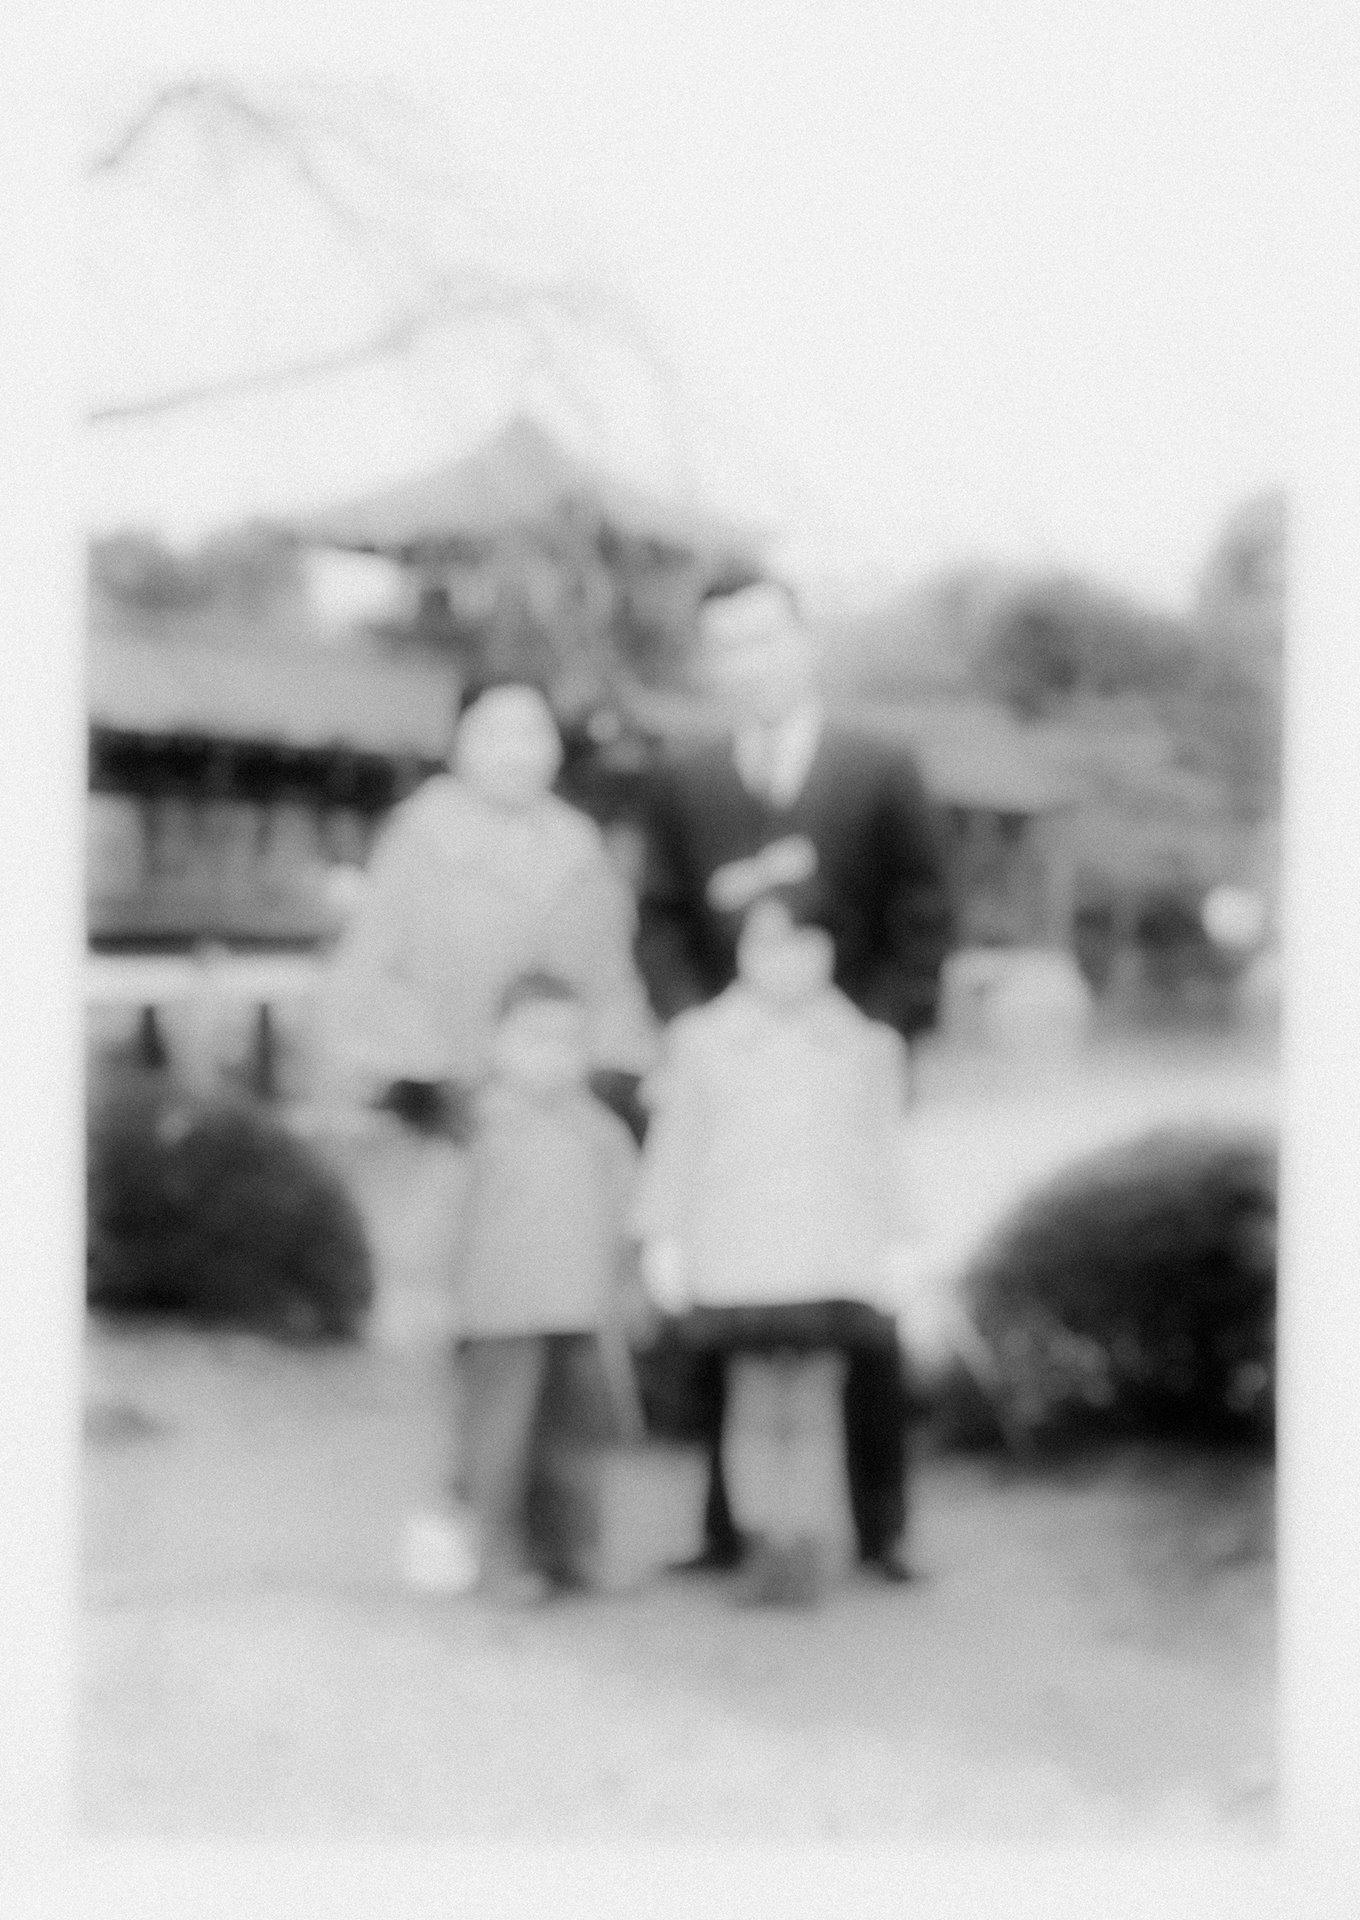 An old family photo showing Masaharu and Kimiko Taniguchi and their two children, in Japan. Kimiko was no longer able to recognize her family due to dementia. Photo scanned and blurred by the photographer.&nbsp;<br />
<br />
&ldquo;New Year&#39;s Day 1997. I called out to her and she did not respond. It was the day that the heartstrings that connected us broke. After a while, she called me &lsquo;father.&rsquo; I was no longer her husband.&rdquo; &ndash; Masaharu Taniguchi.<br />
&nbsp;